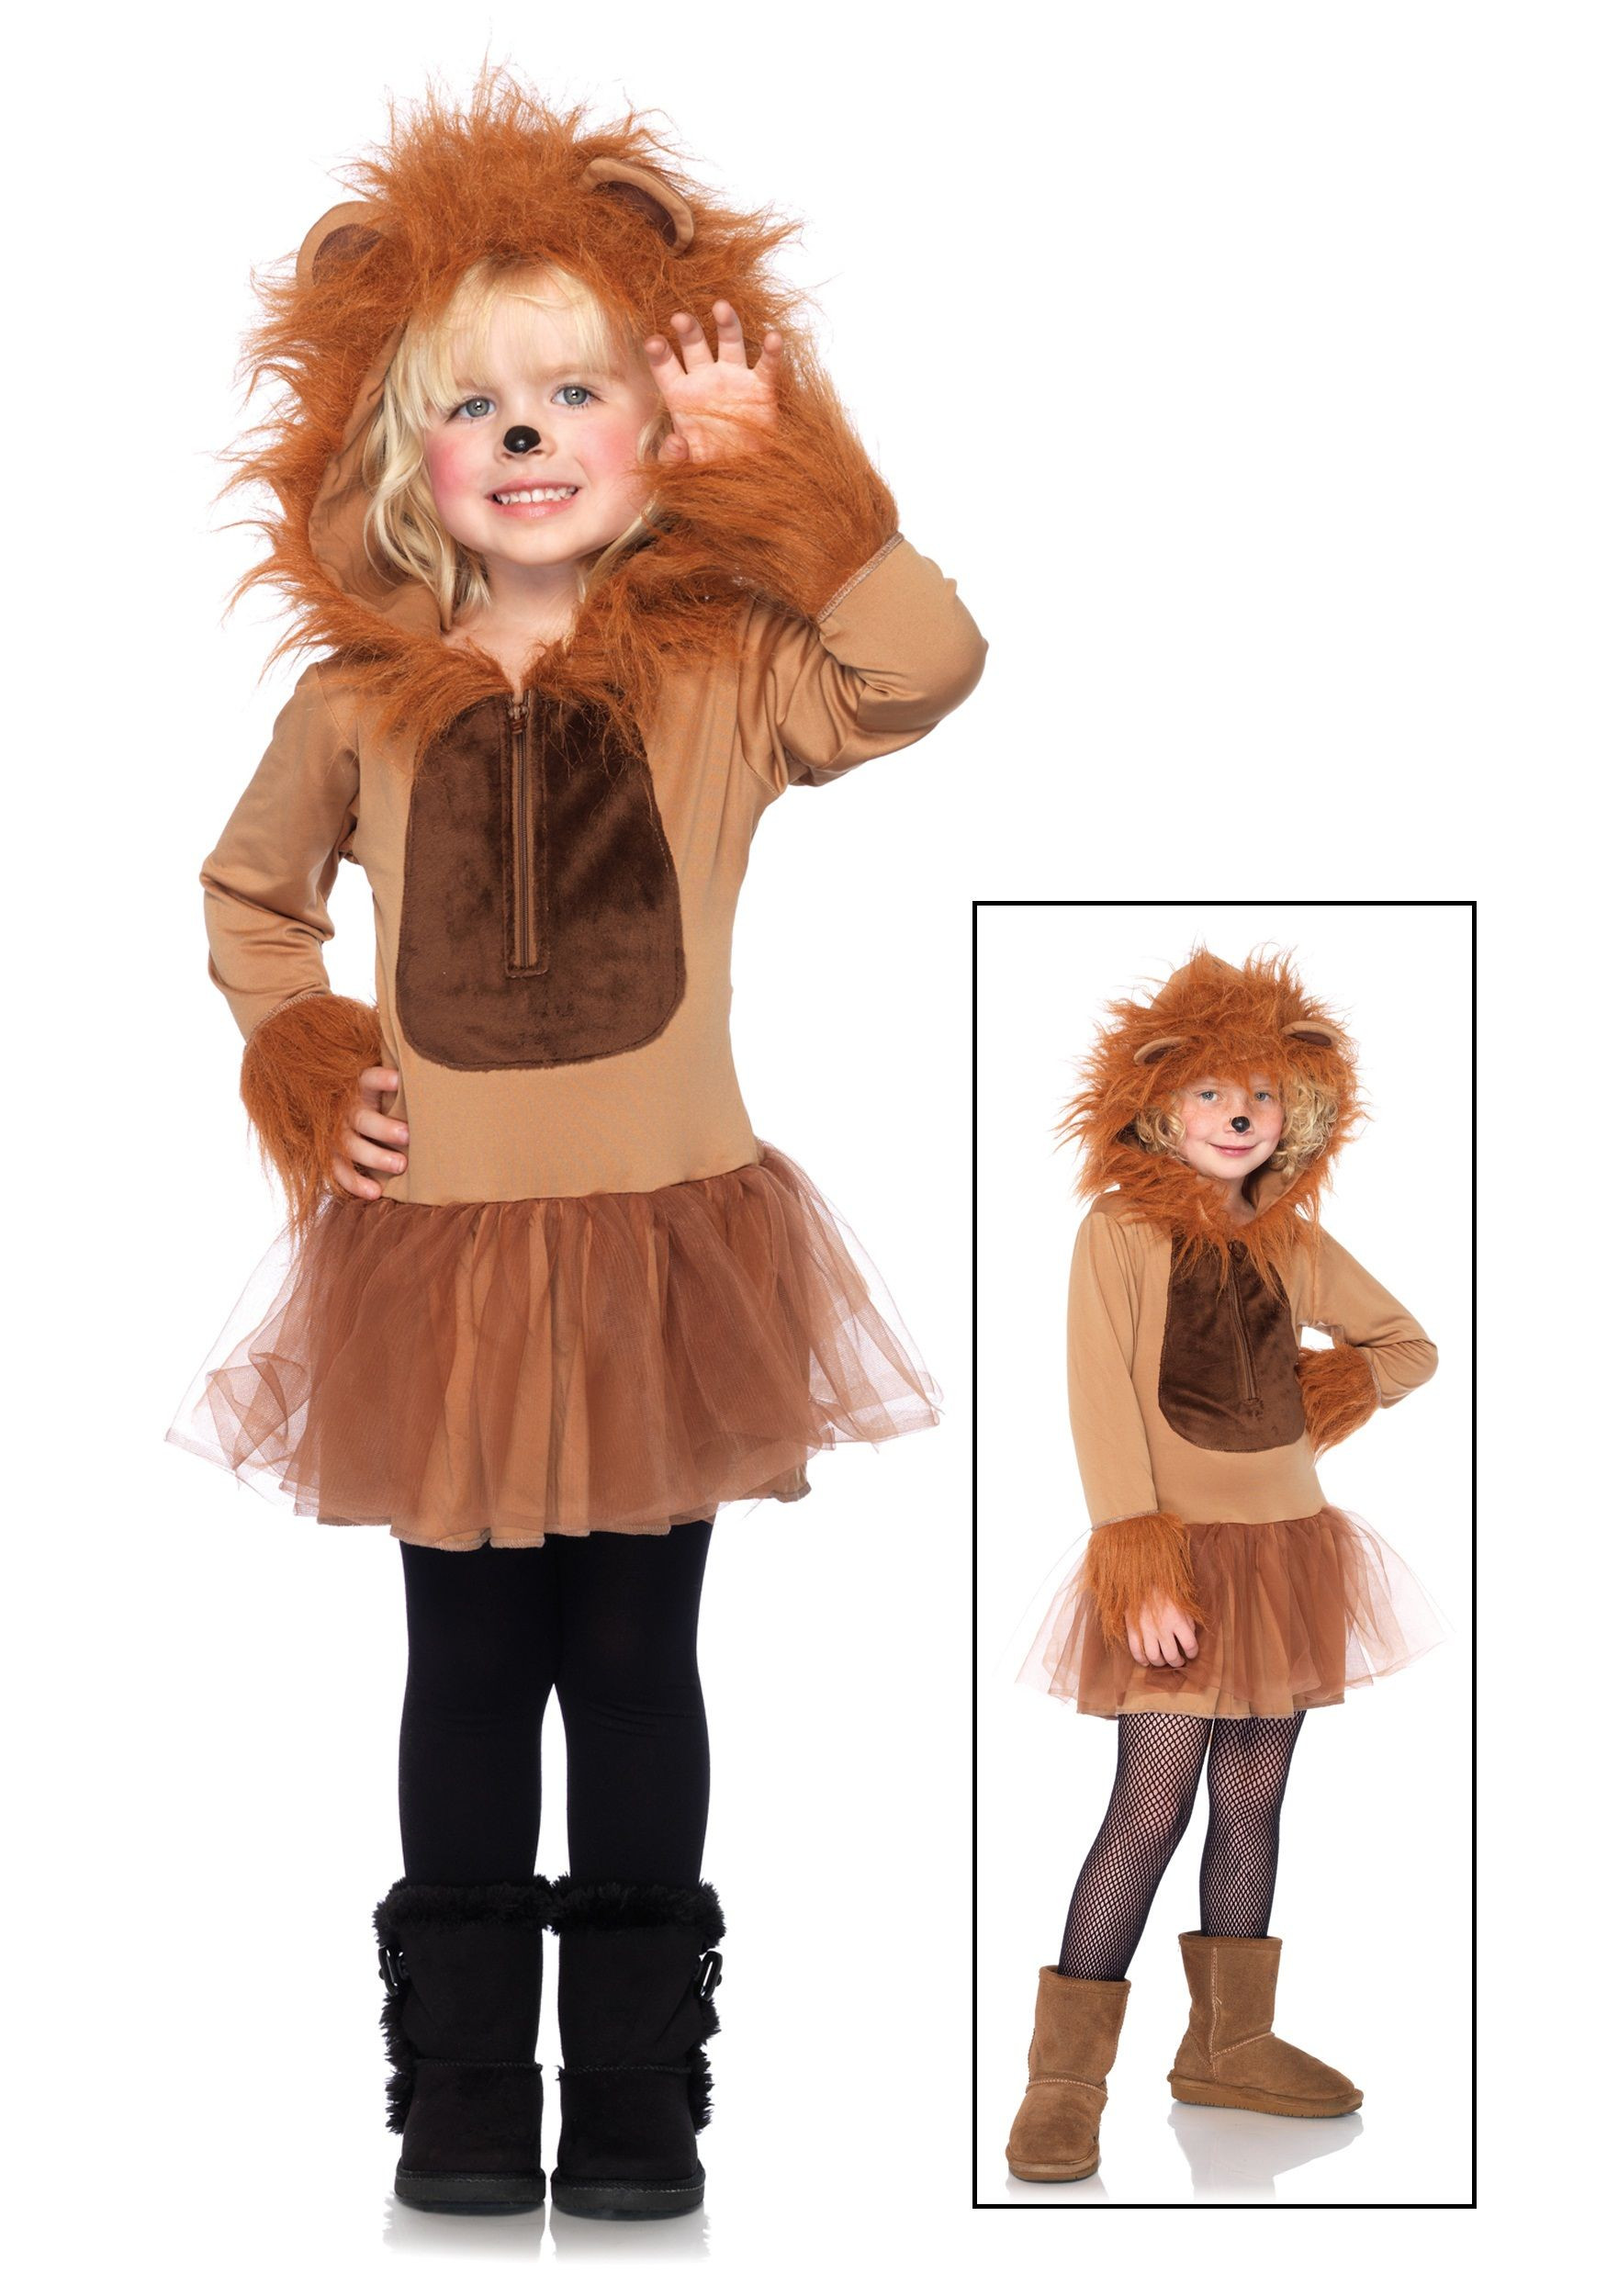 DIY Lion Costume For Toddler
 Child Cuddly Lion Costume Halloween Costumes